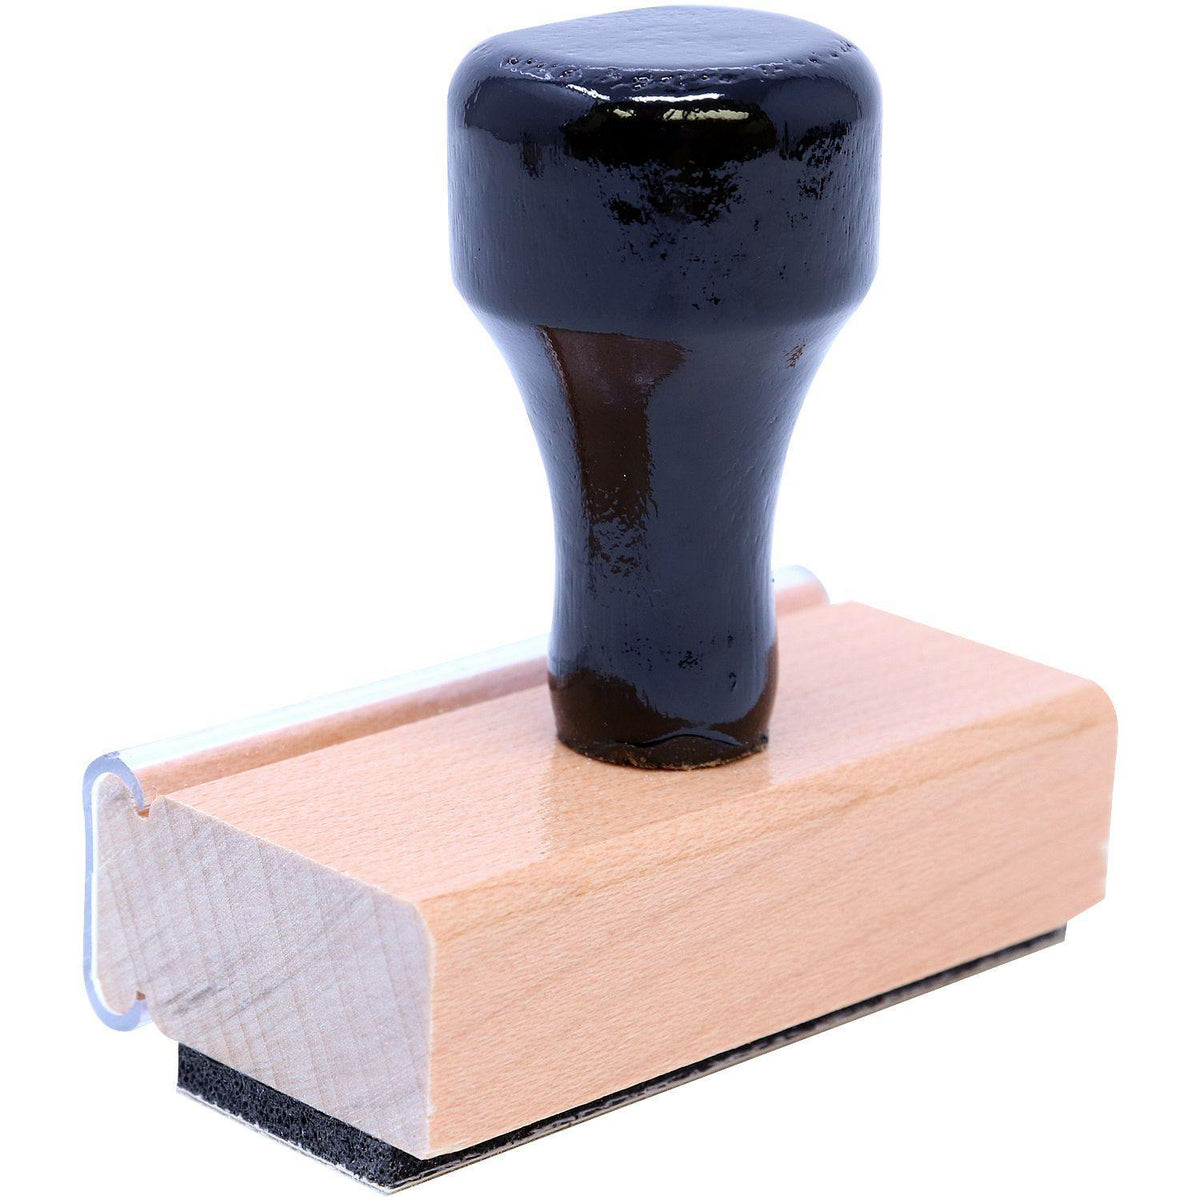 Large Surface Rubber Stamp - Engineer Seal Stamps - Brand_Acorn, Impression Size_Large, Stamp Type_Regular Stamp, Type of Use_Office